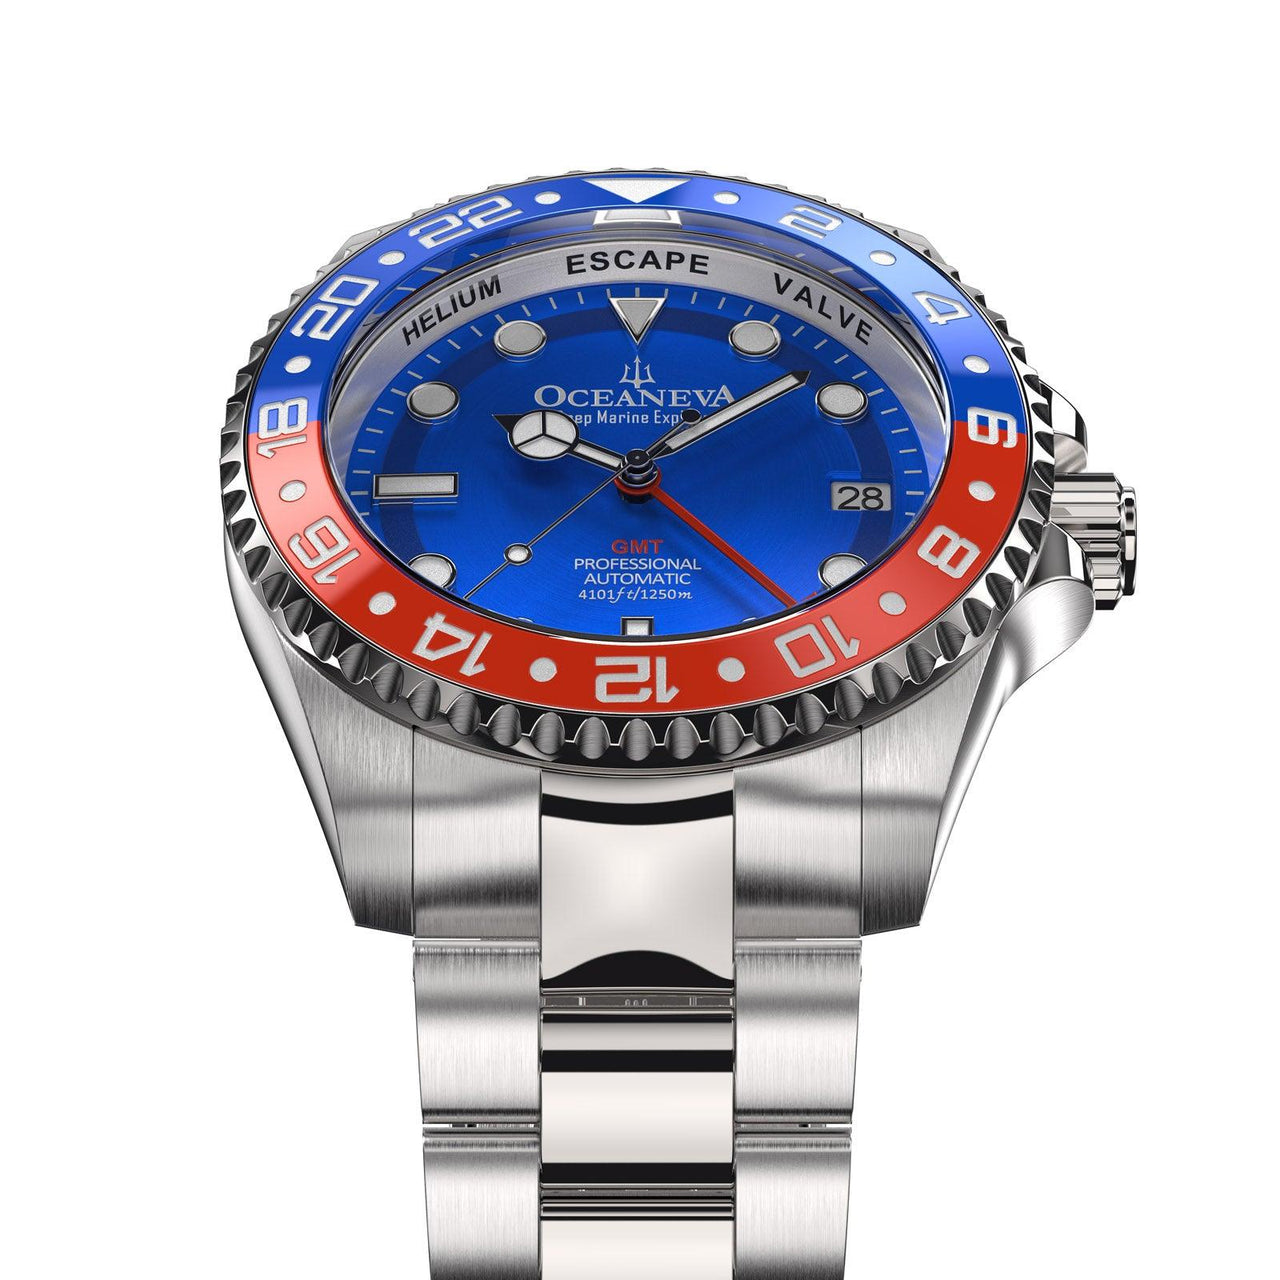 Oceaneva™ Deep Marine Explorer GMT Automatic 1250M Men's Watch - BL.RD.NH.BL.GMT.ST automatic GMT watch, Automatic watches, Diver GMT, GMT Dive Watch, men's gmt watches